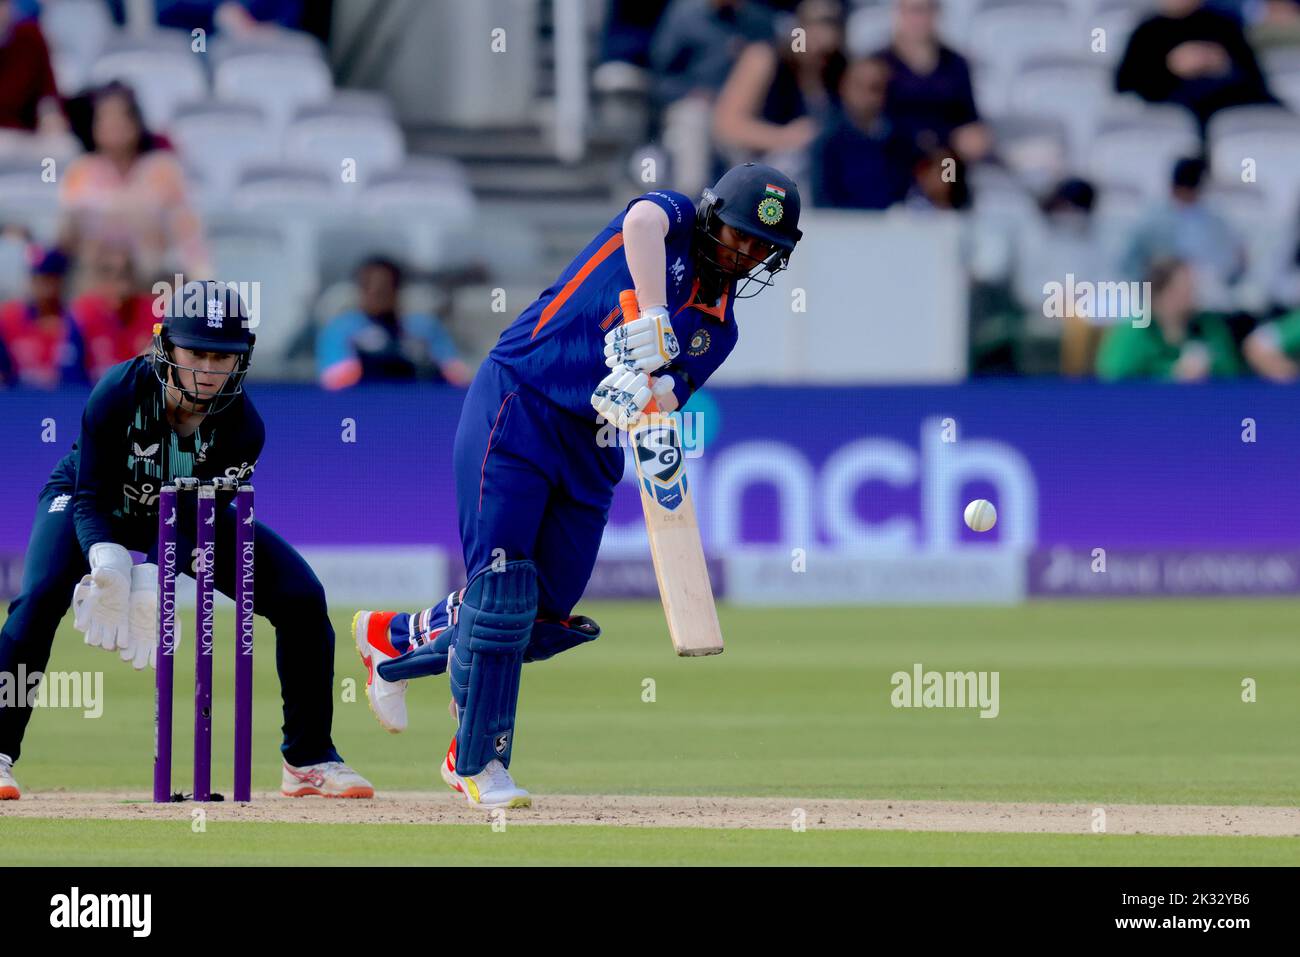 London, UK. 24 September 2022.  India’s Deepti Sharma batting as England women take on India in the 3rd Royal London One Day International at Lords. David Rowe/Alamy Live News. Stock Photo